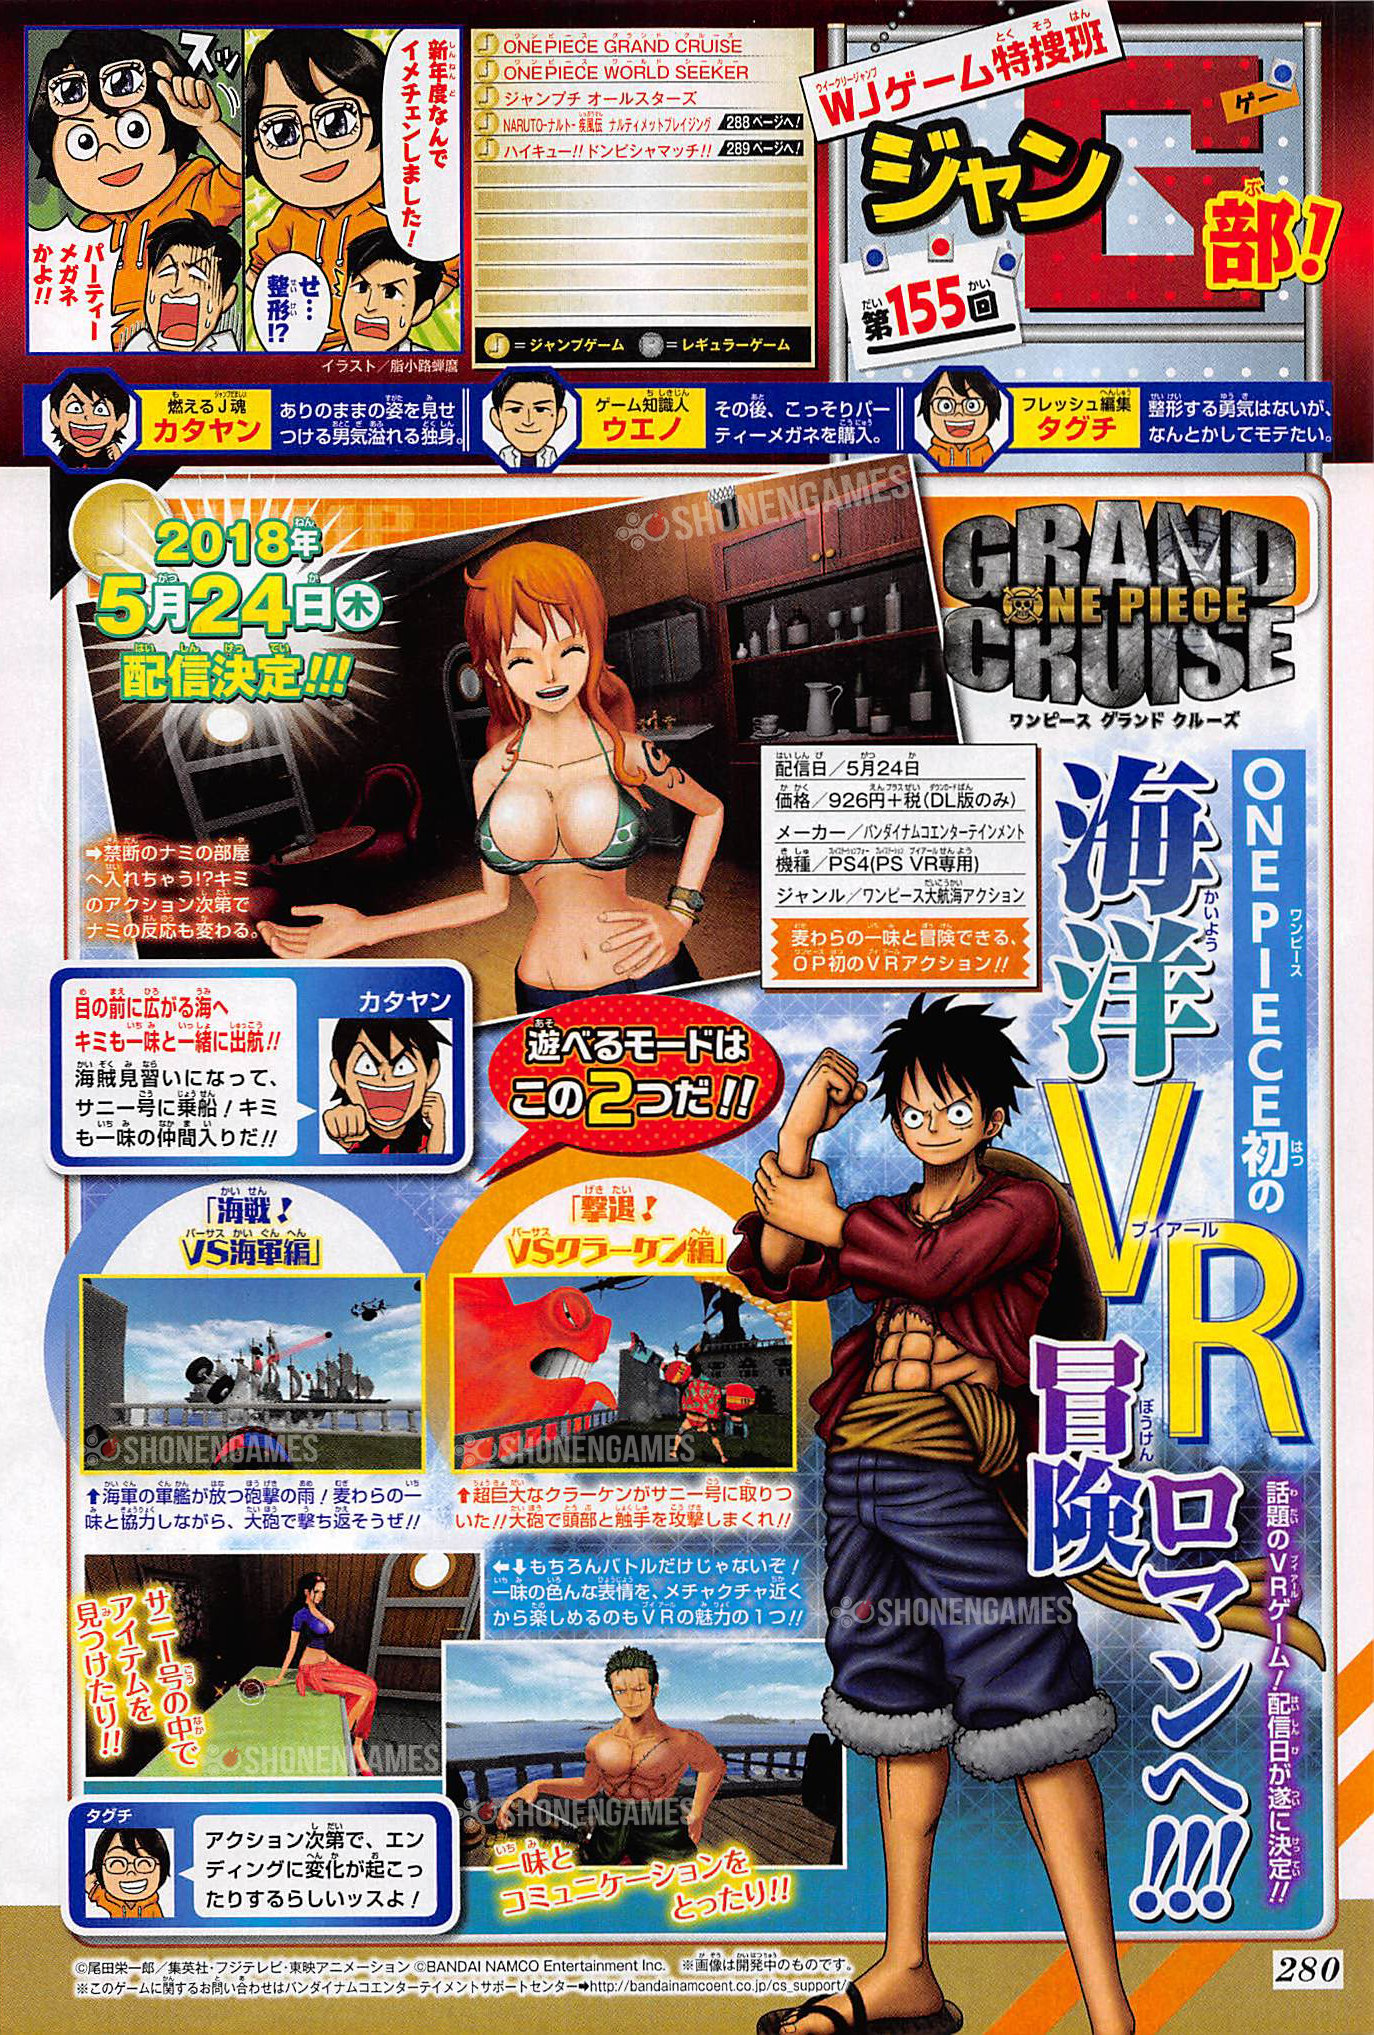 One Piece Grand Cruise Launches May 24 In Japan Gematsu